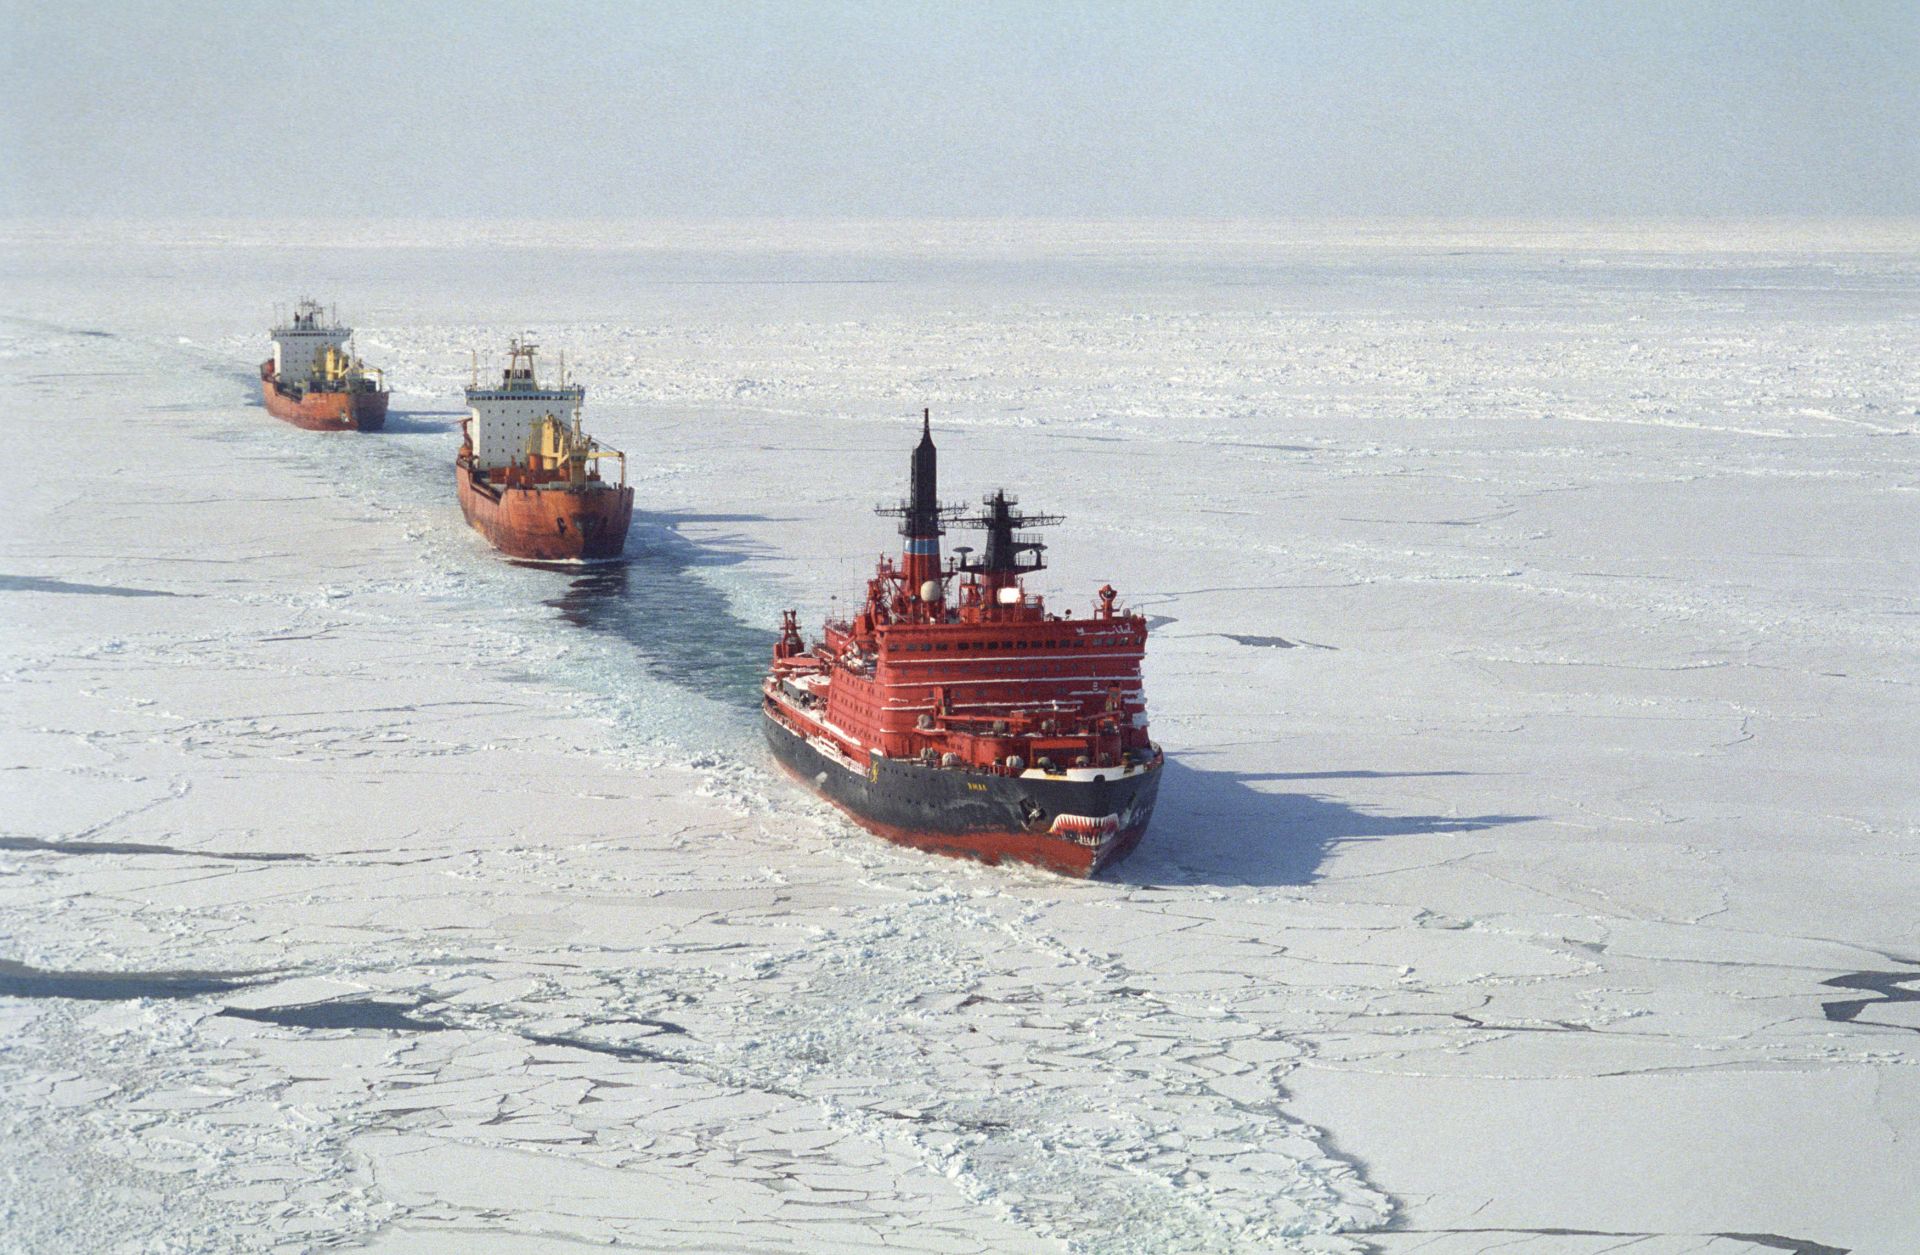 The Yamal, a Russian nuclear-powered icebreaker, clears the way in the Kara Sea.